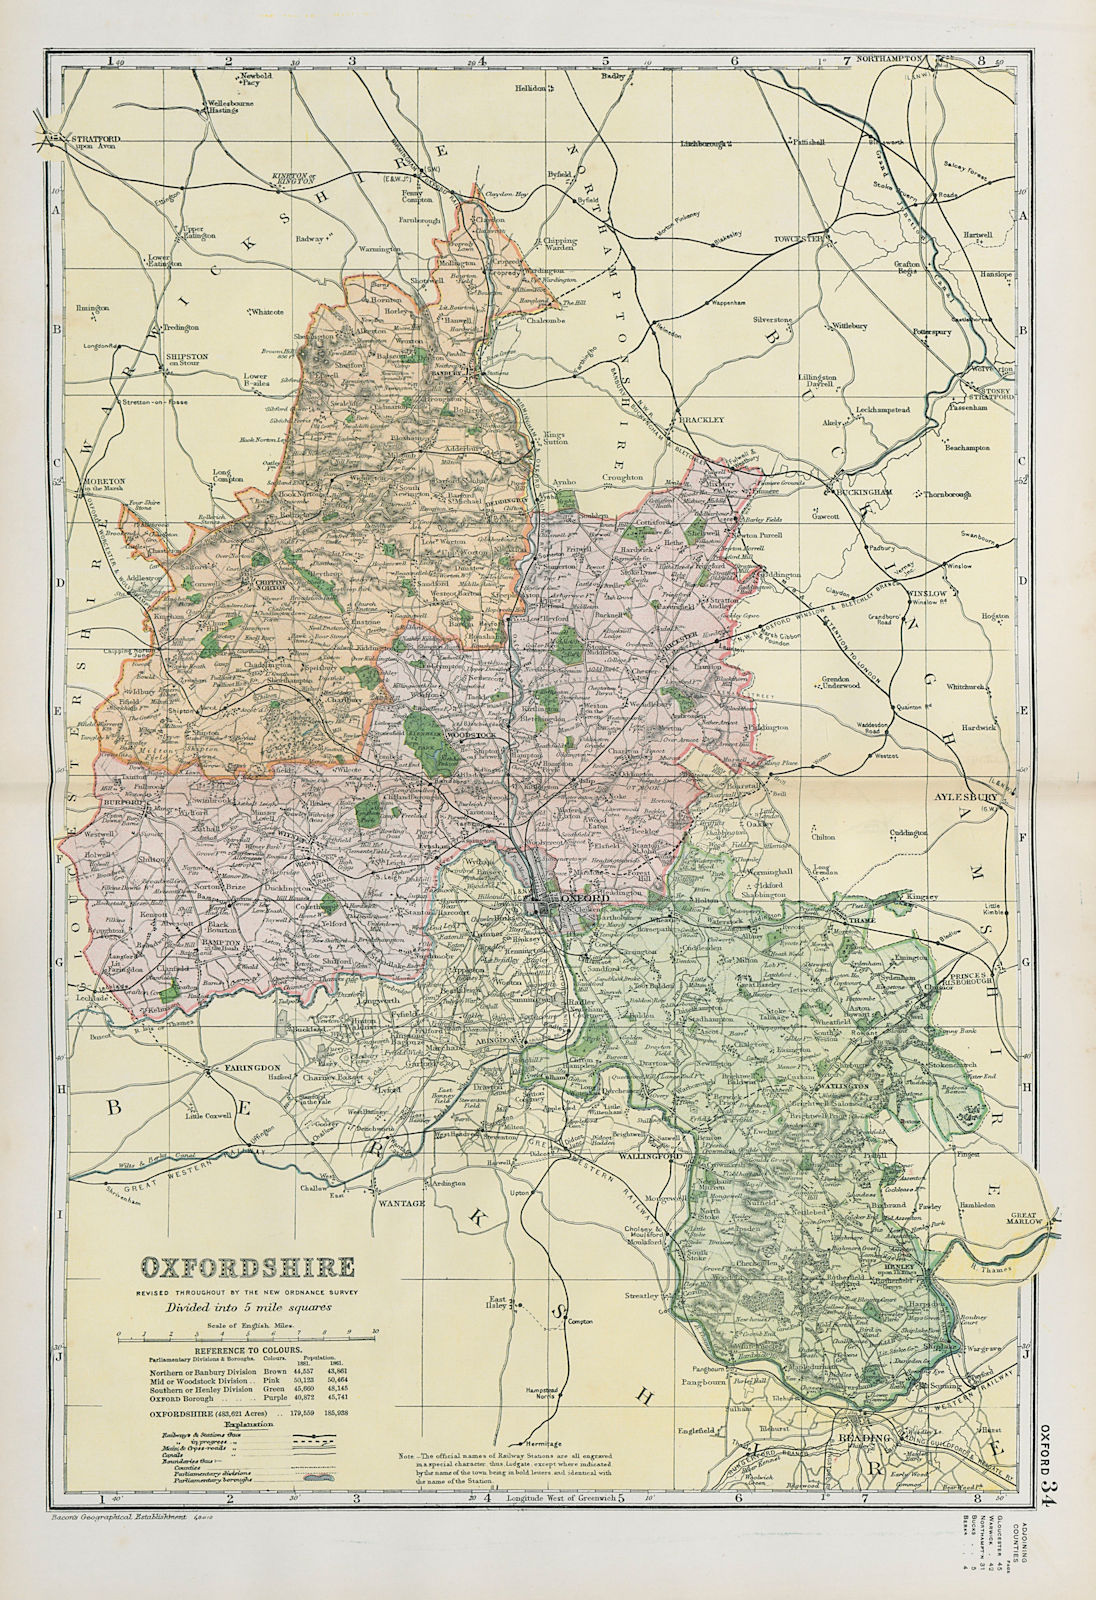 OXFORDSHIRE. Showing Parliamentary divisions, boroughs & parks. BACON 1900 map